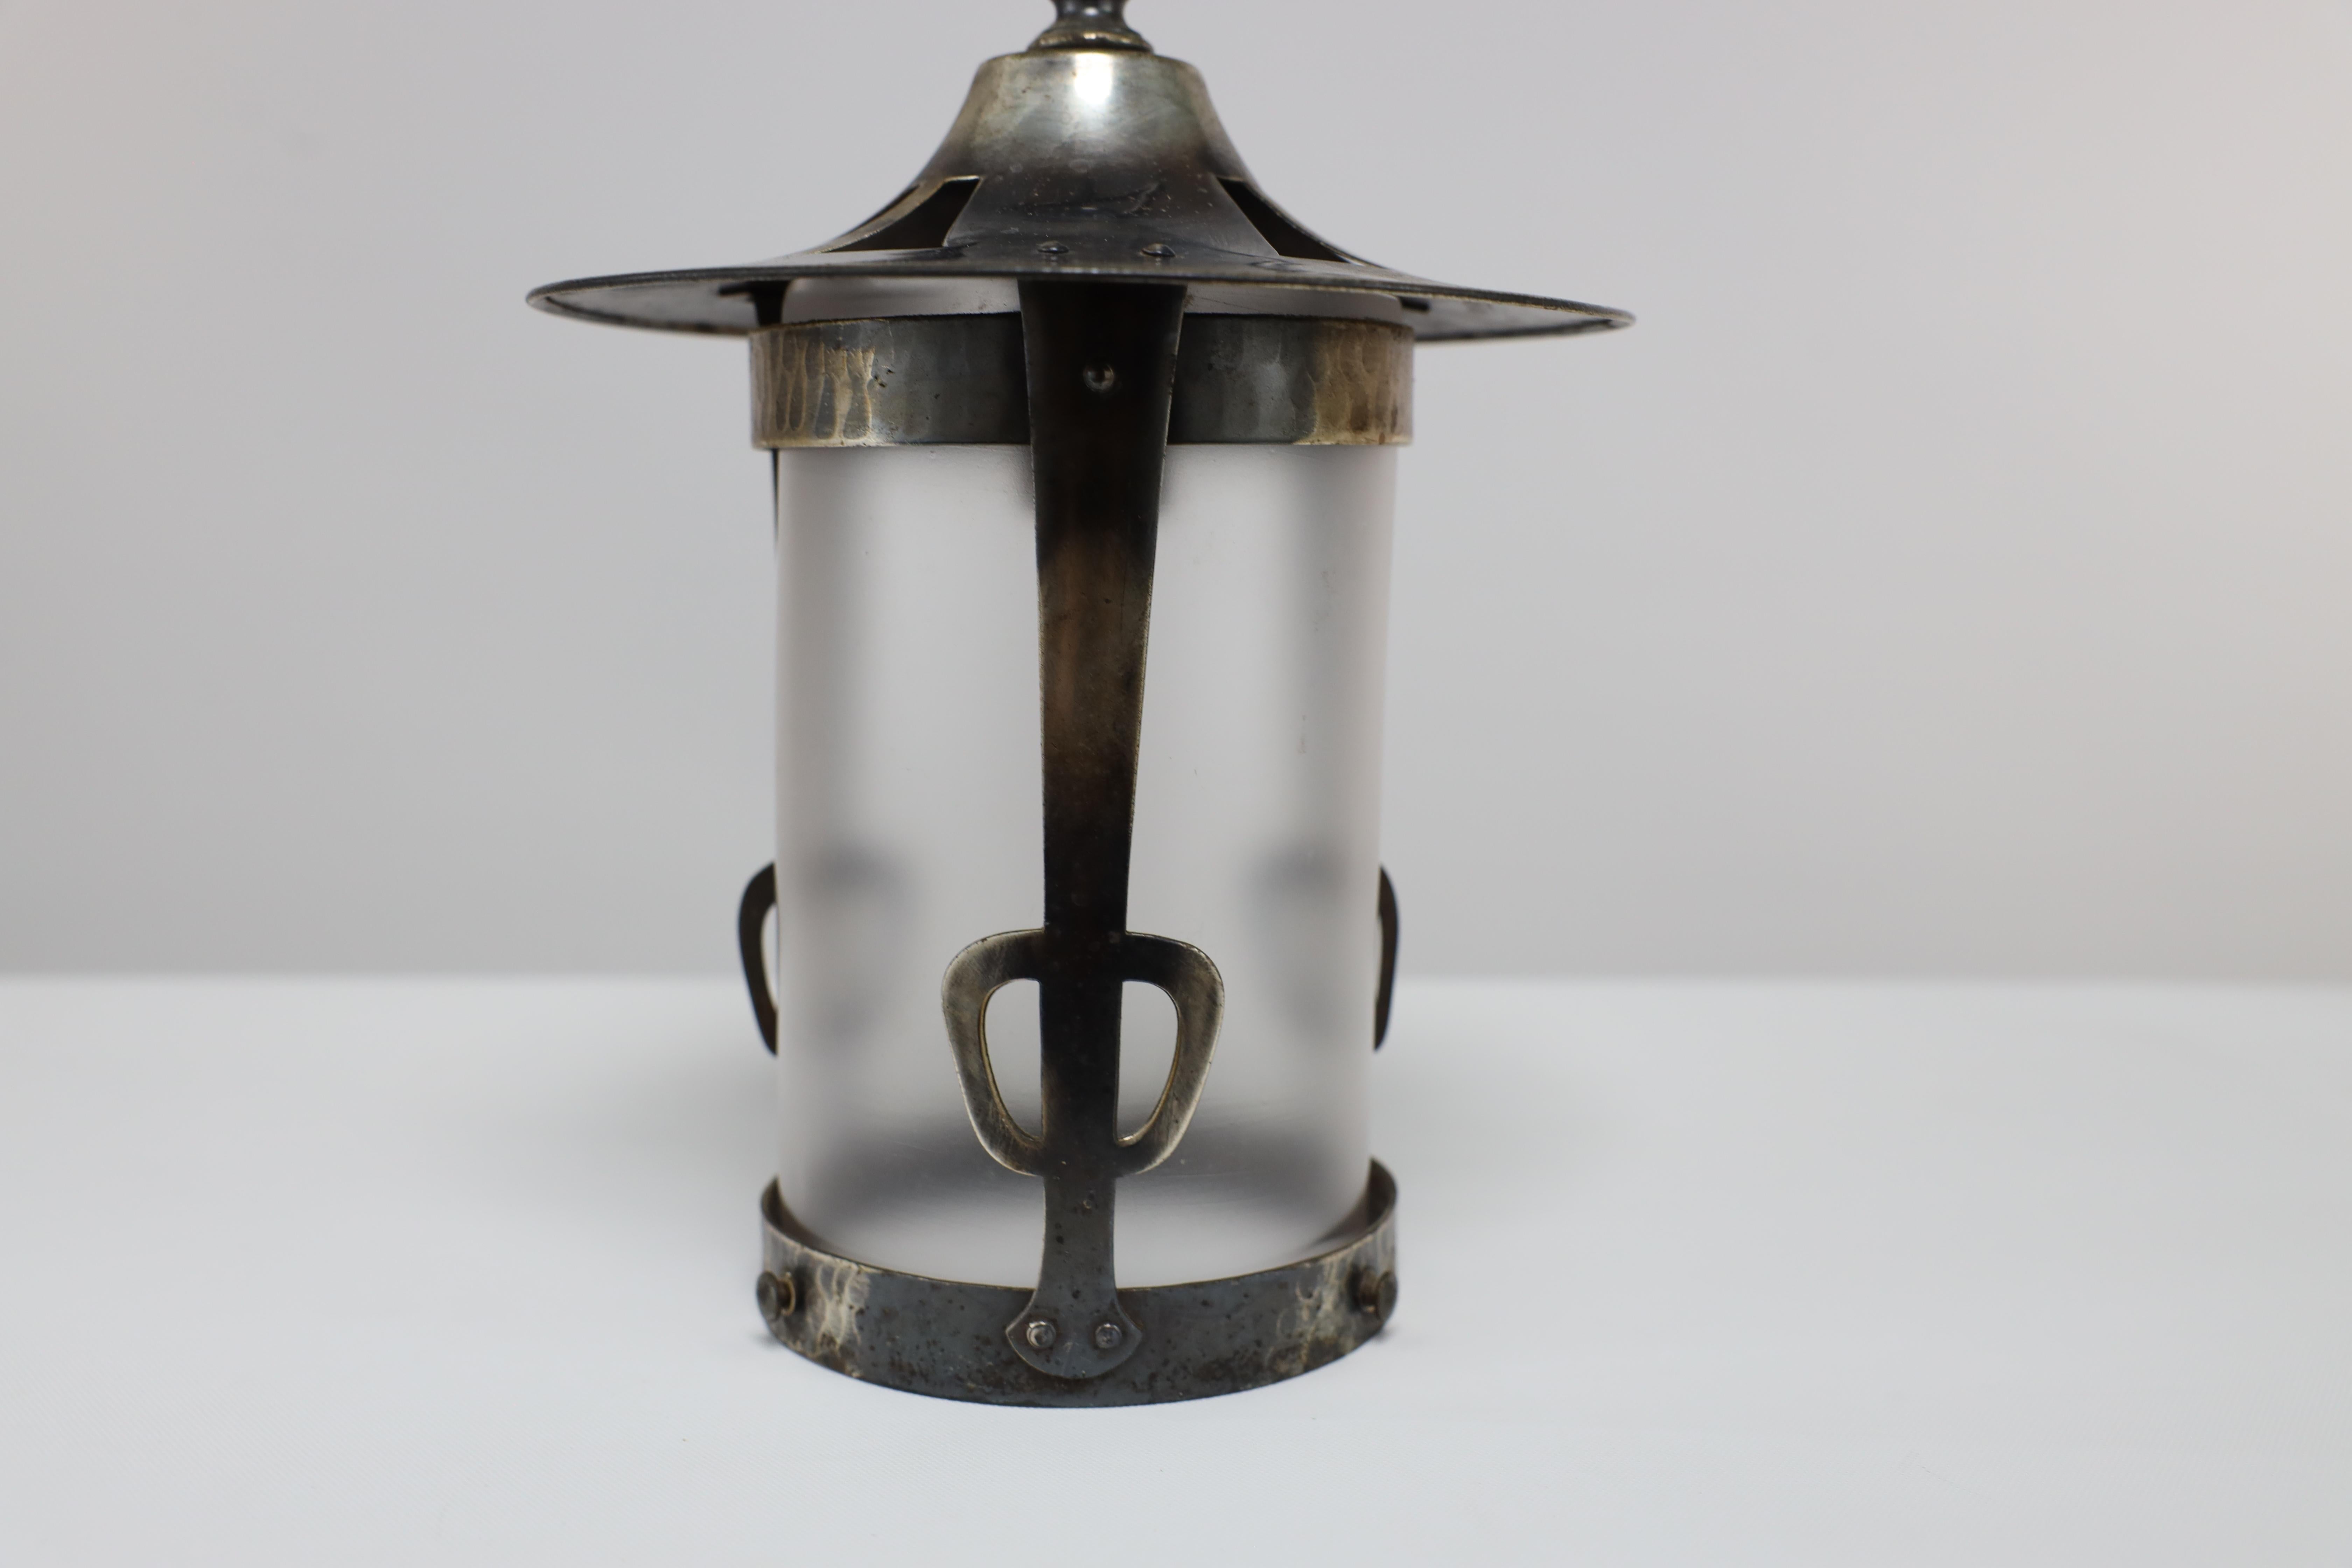 An Arts and Crafts Glasgow School hand-hammered copper lantern with a flaring top and the original opaque shade.